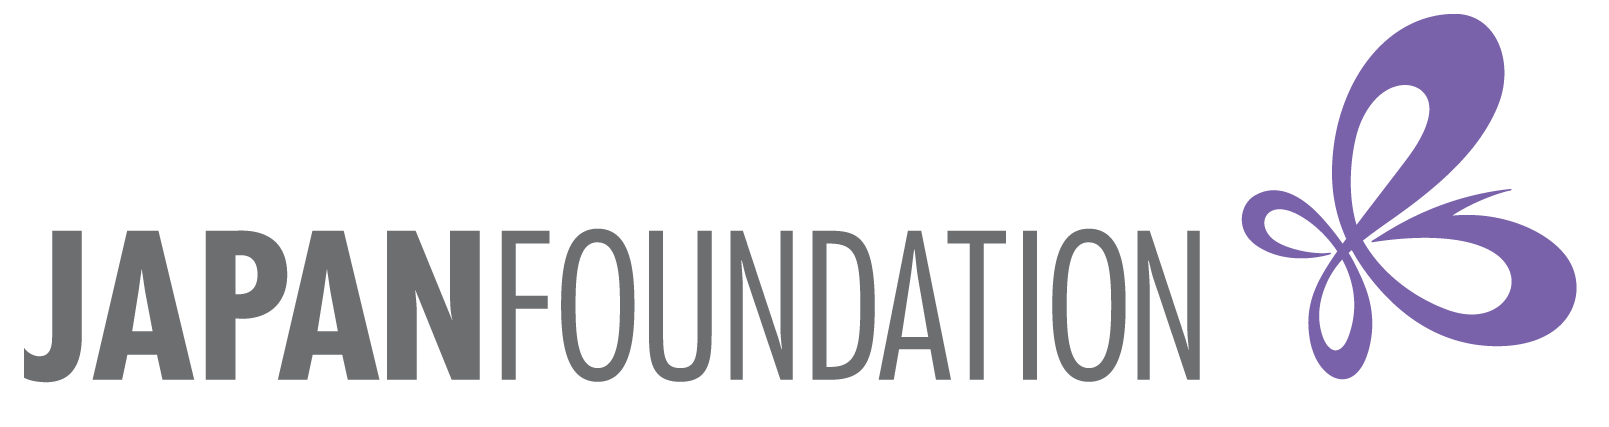 logo for the Japan Foundation